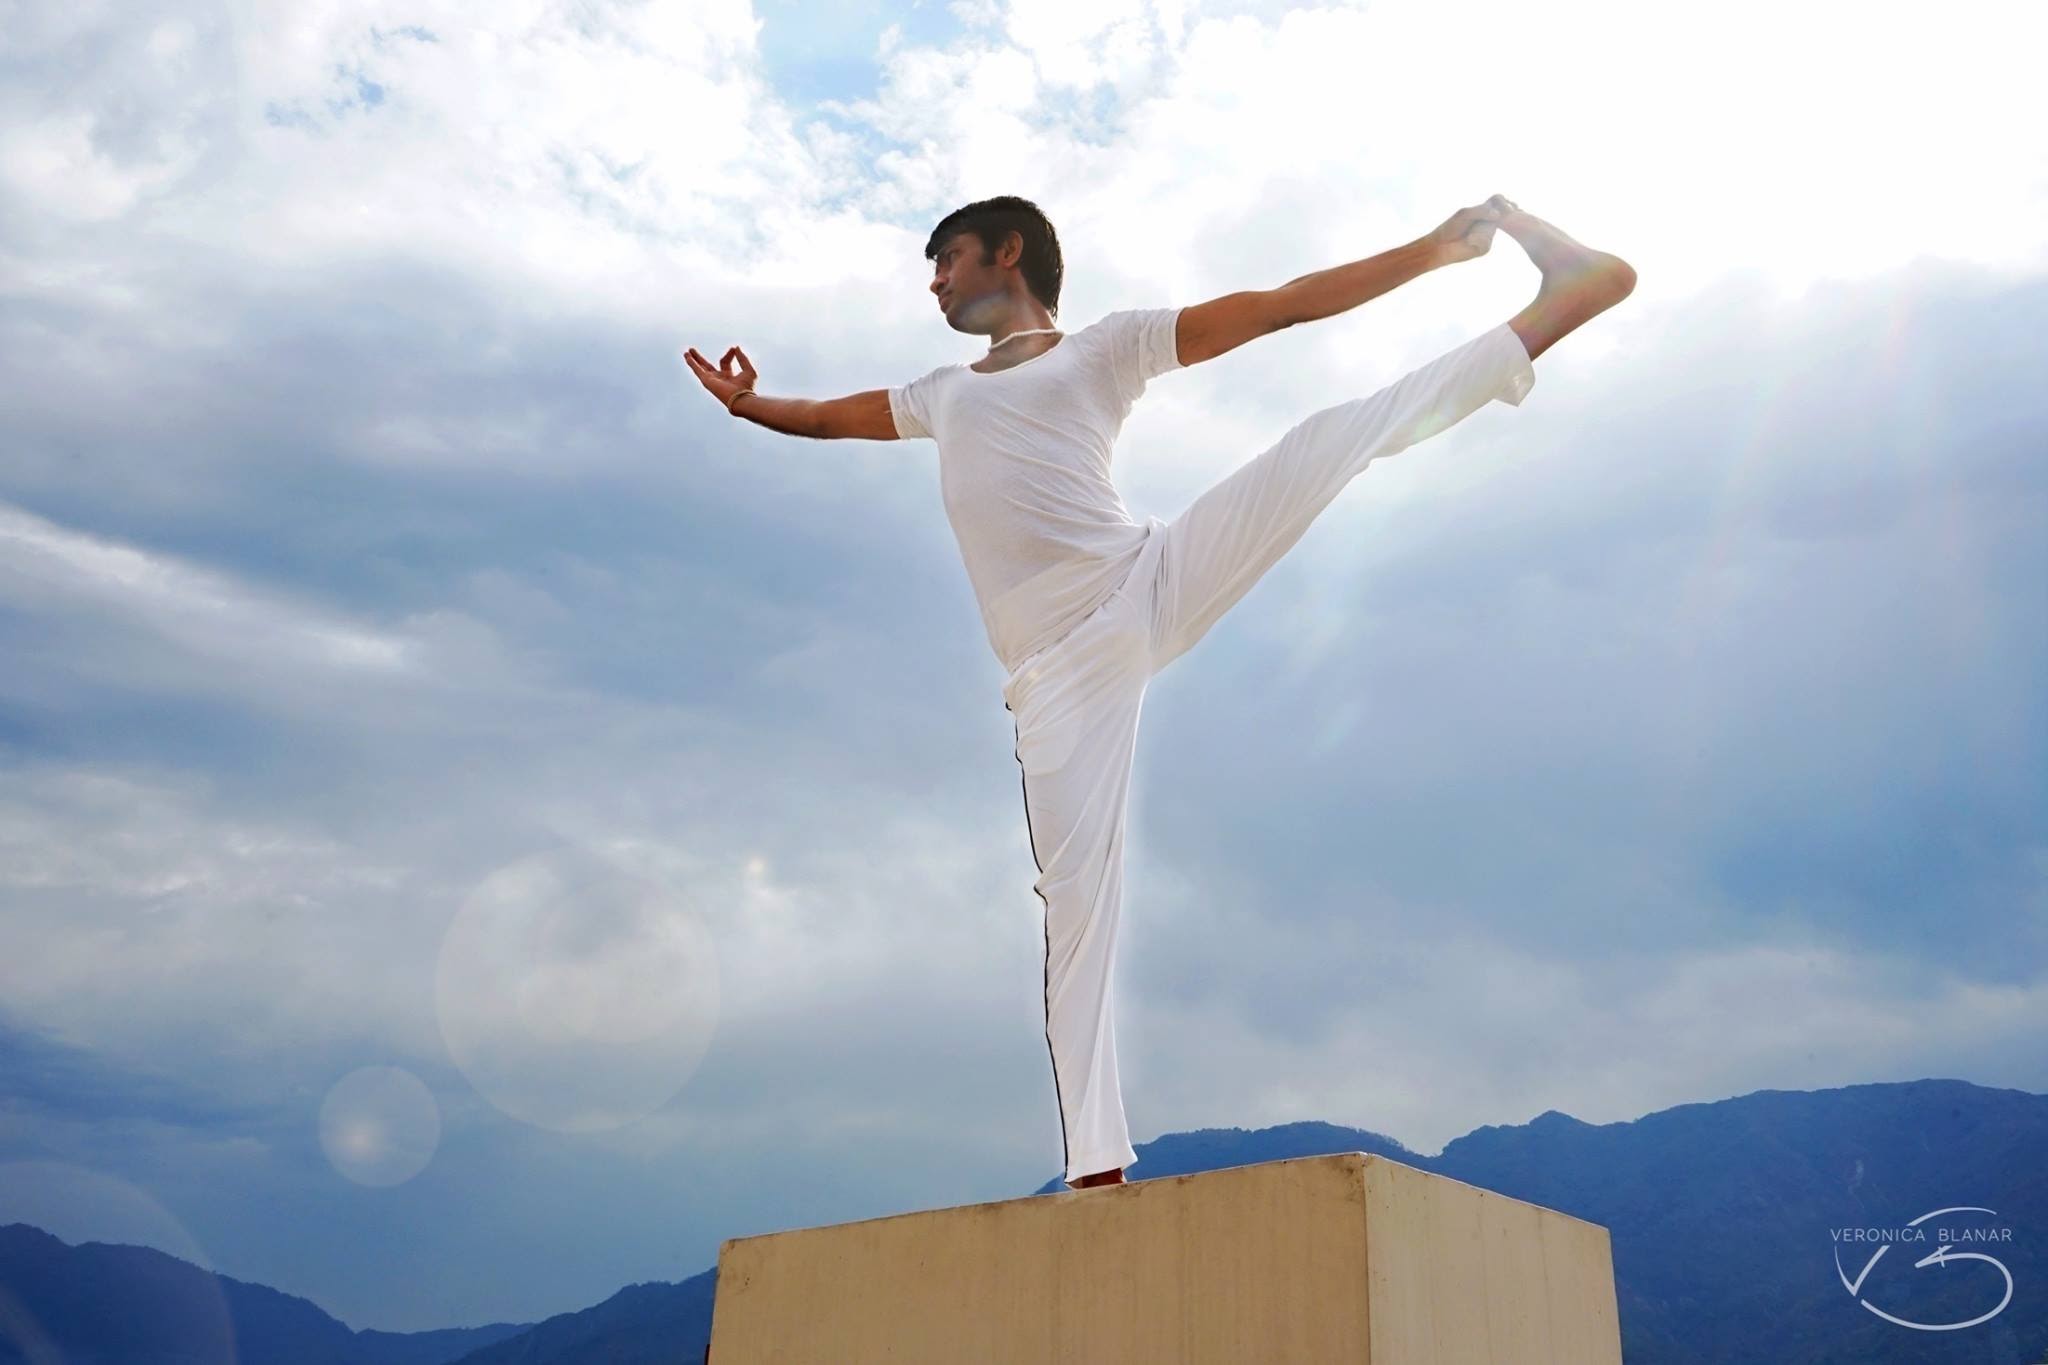 The Best Online Yoga Classes From Expert Yogis Based In India’s Spiritual Center